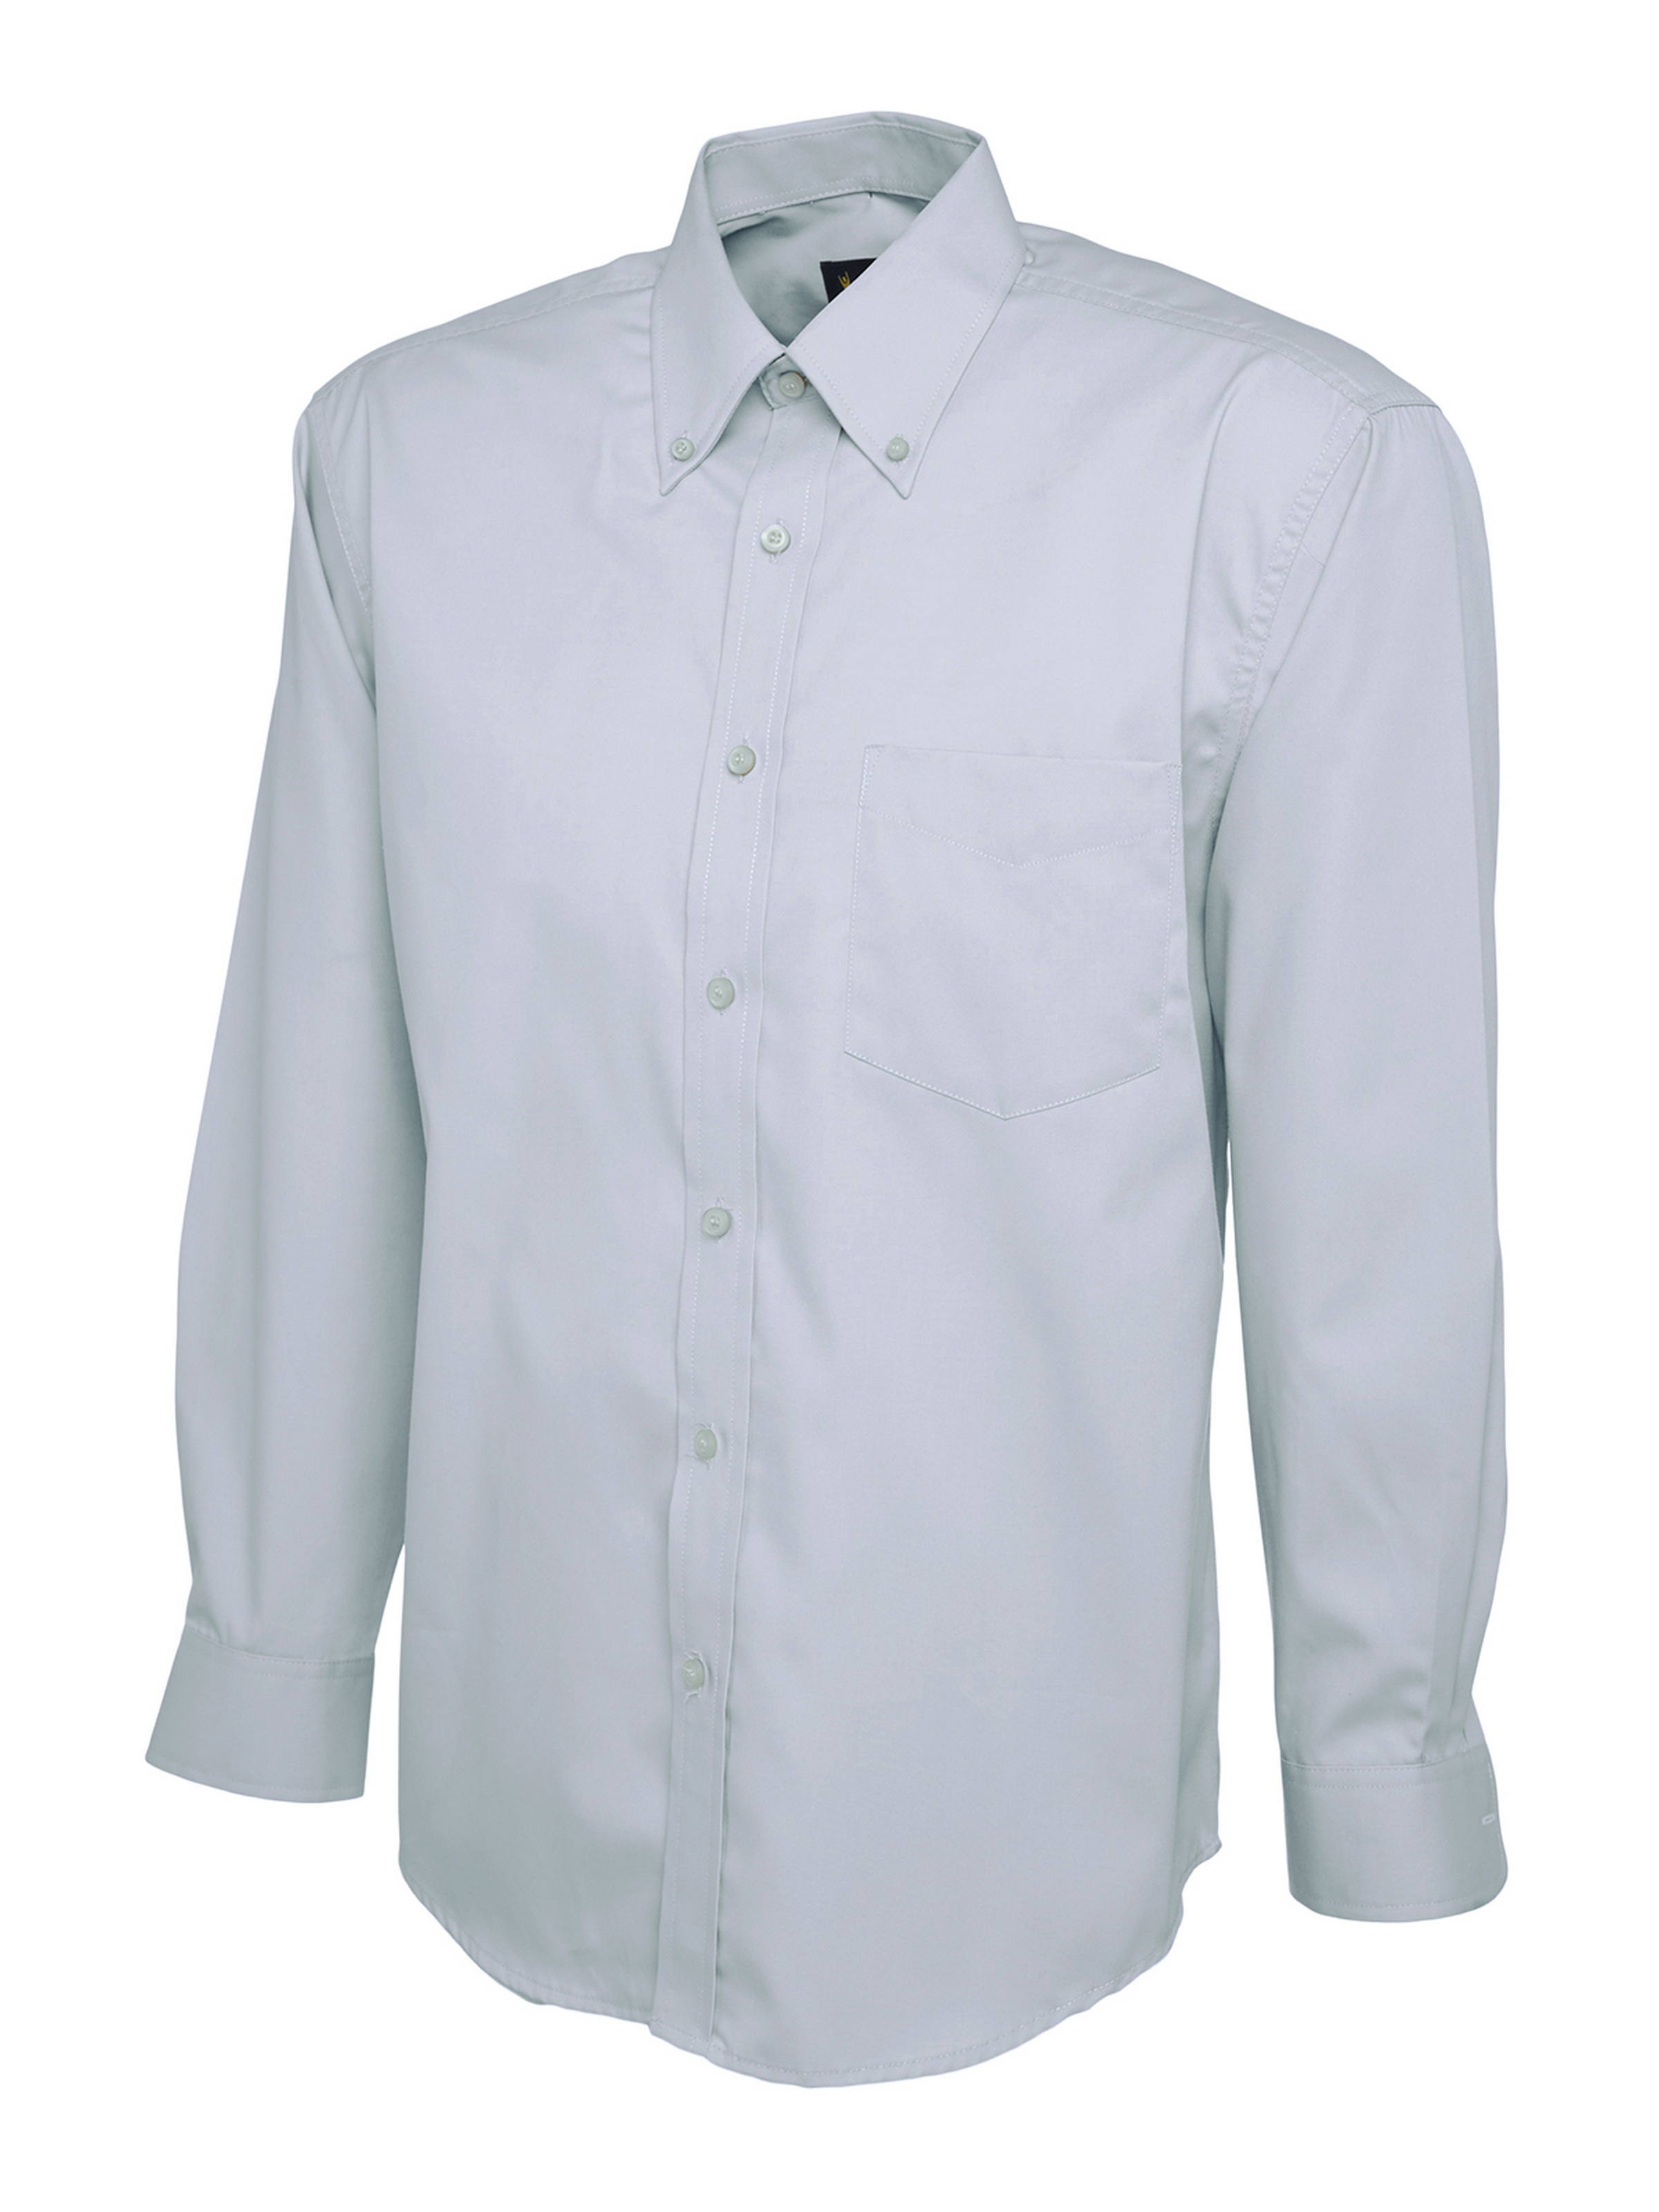 701 Mens Pinpoint Oxford Full Sleeve Shirt